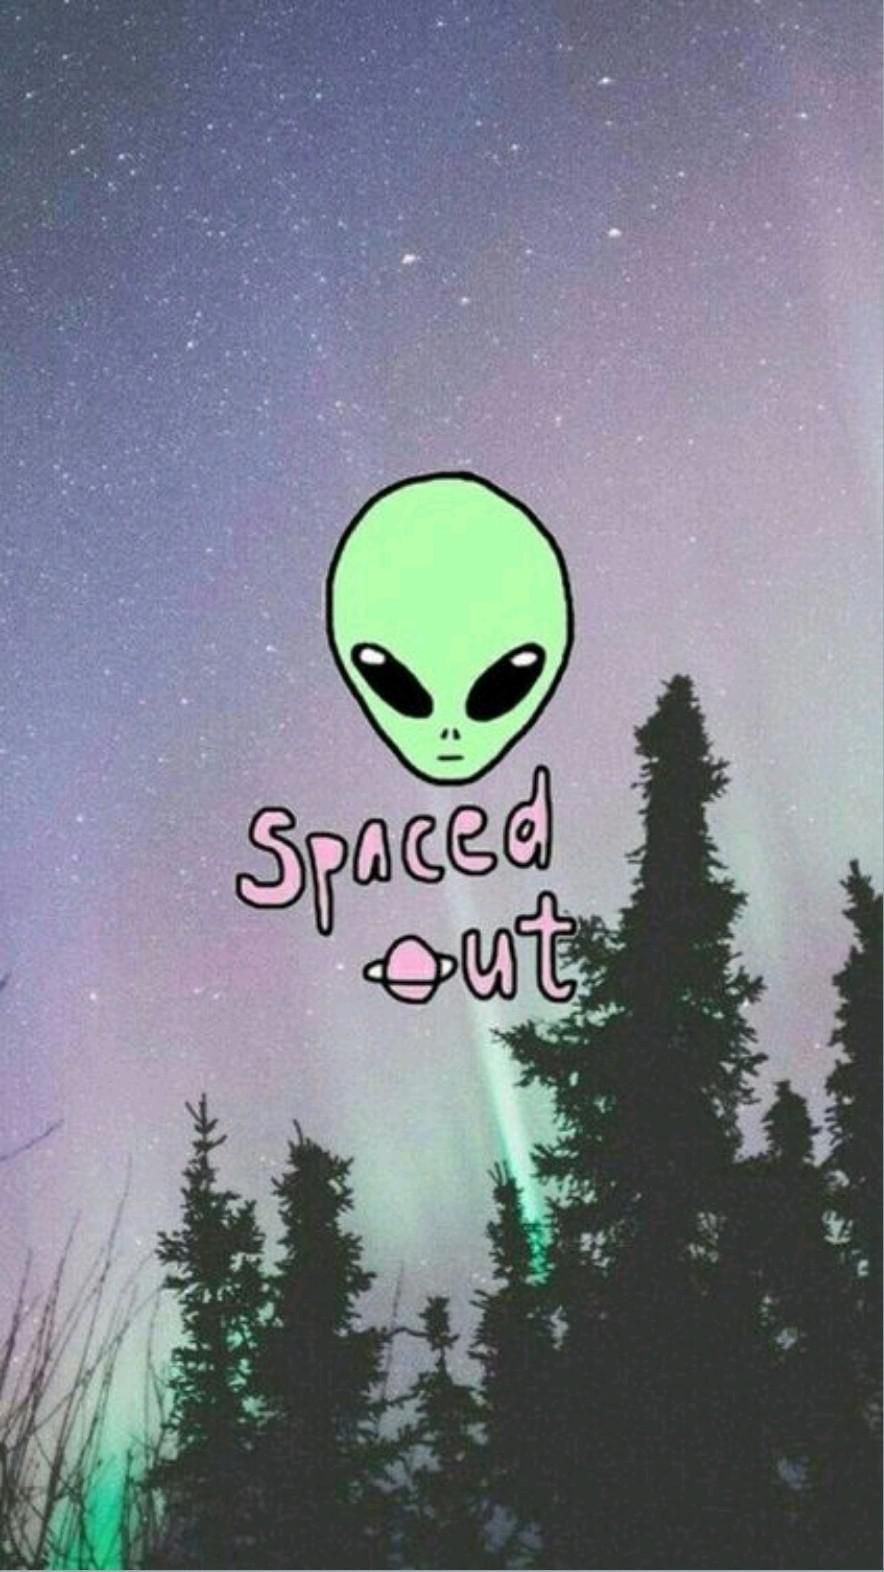 wallpaper spaced out with Alien. Alien iphone wallpaper, Alien aesthetic, Trippy wallpaper